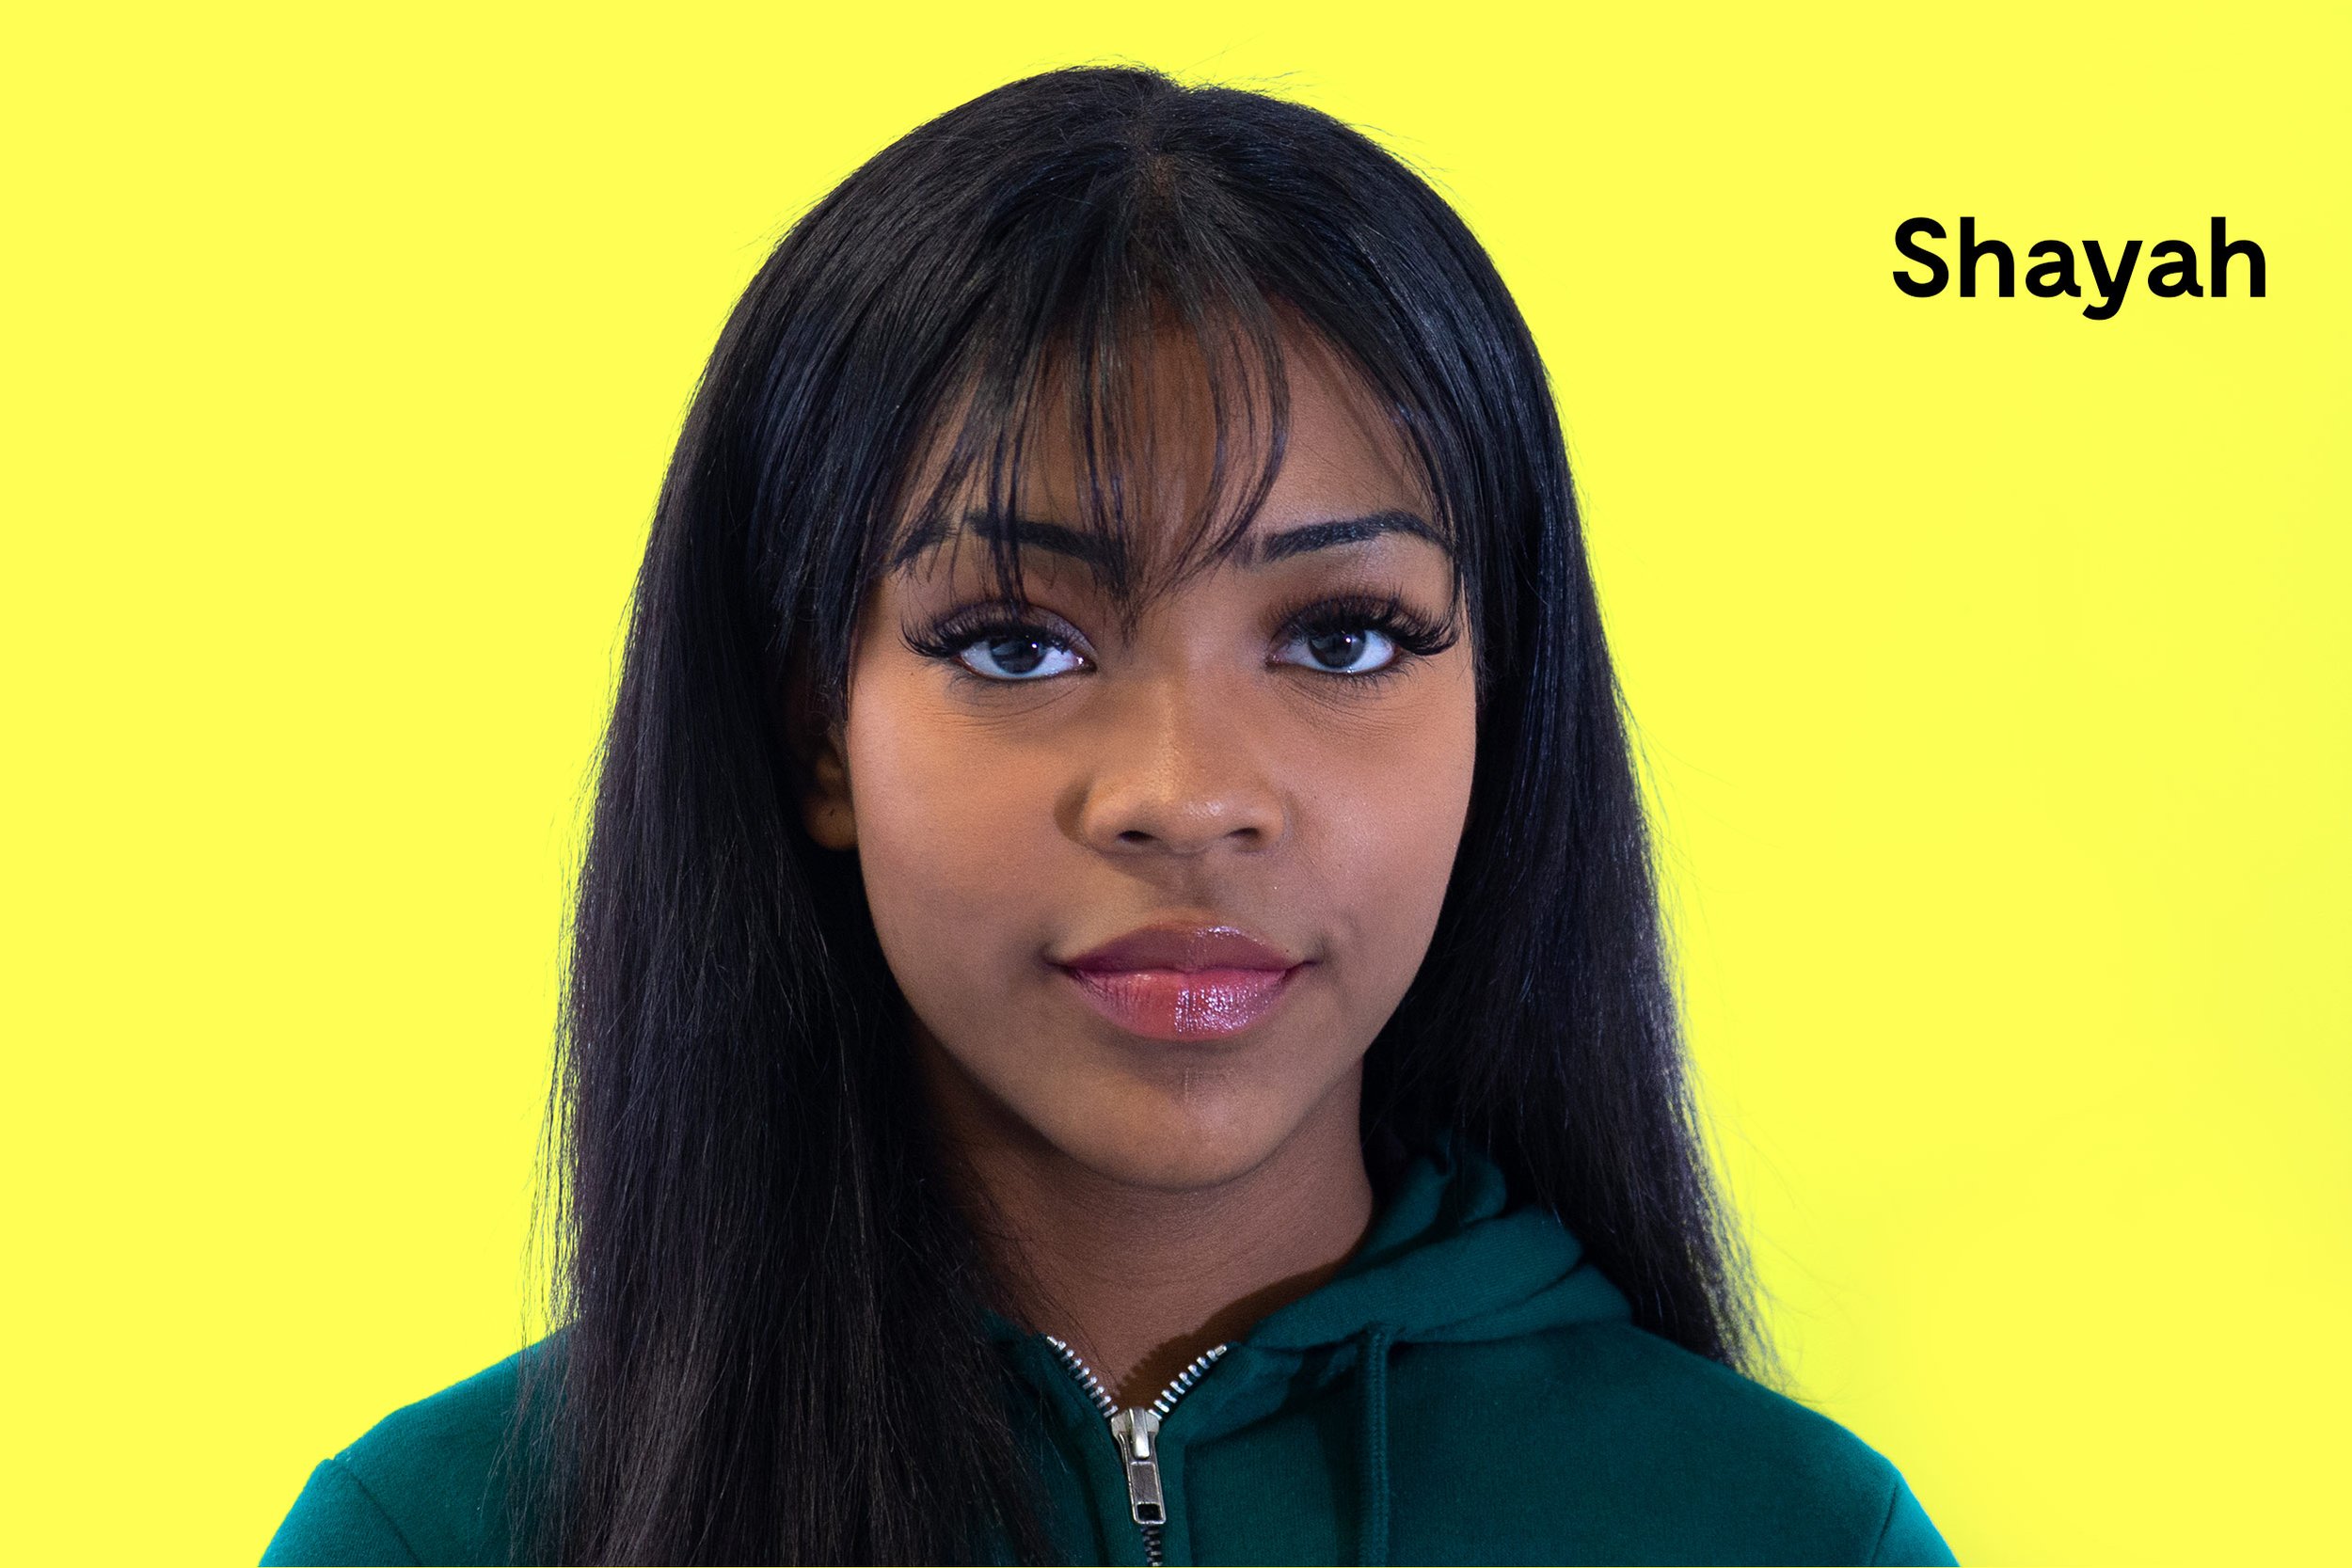   Shayah  Corbin (b. 2006) hopes, as part  À l'image – Takeover,  to share her point of view as a black teenager exploring her identity. Shayah is learning about the importance of perspective and open-mindedness. After graduating from high school, Sh